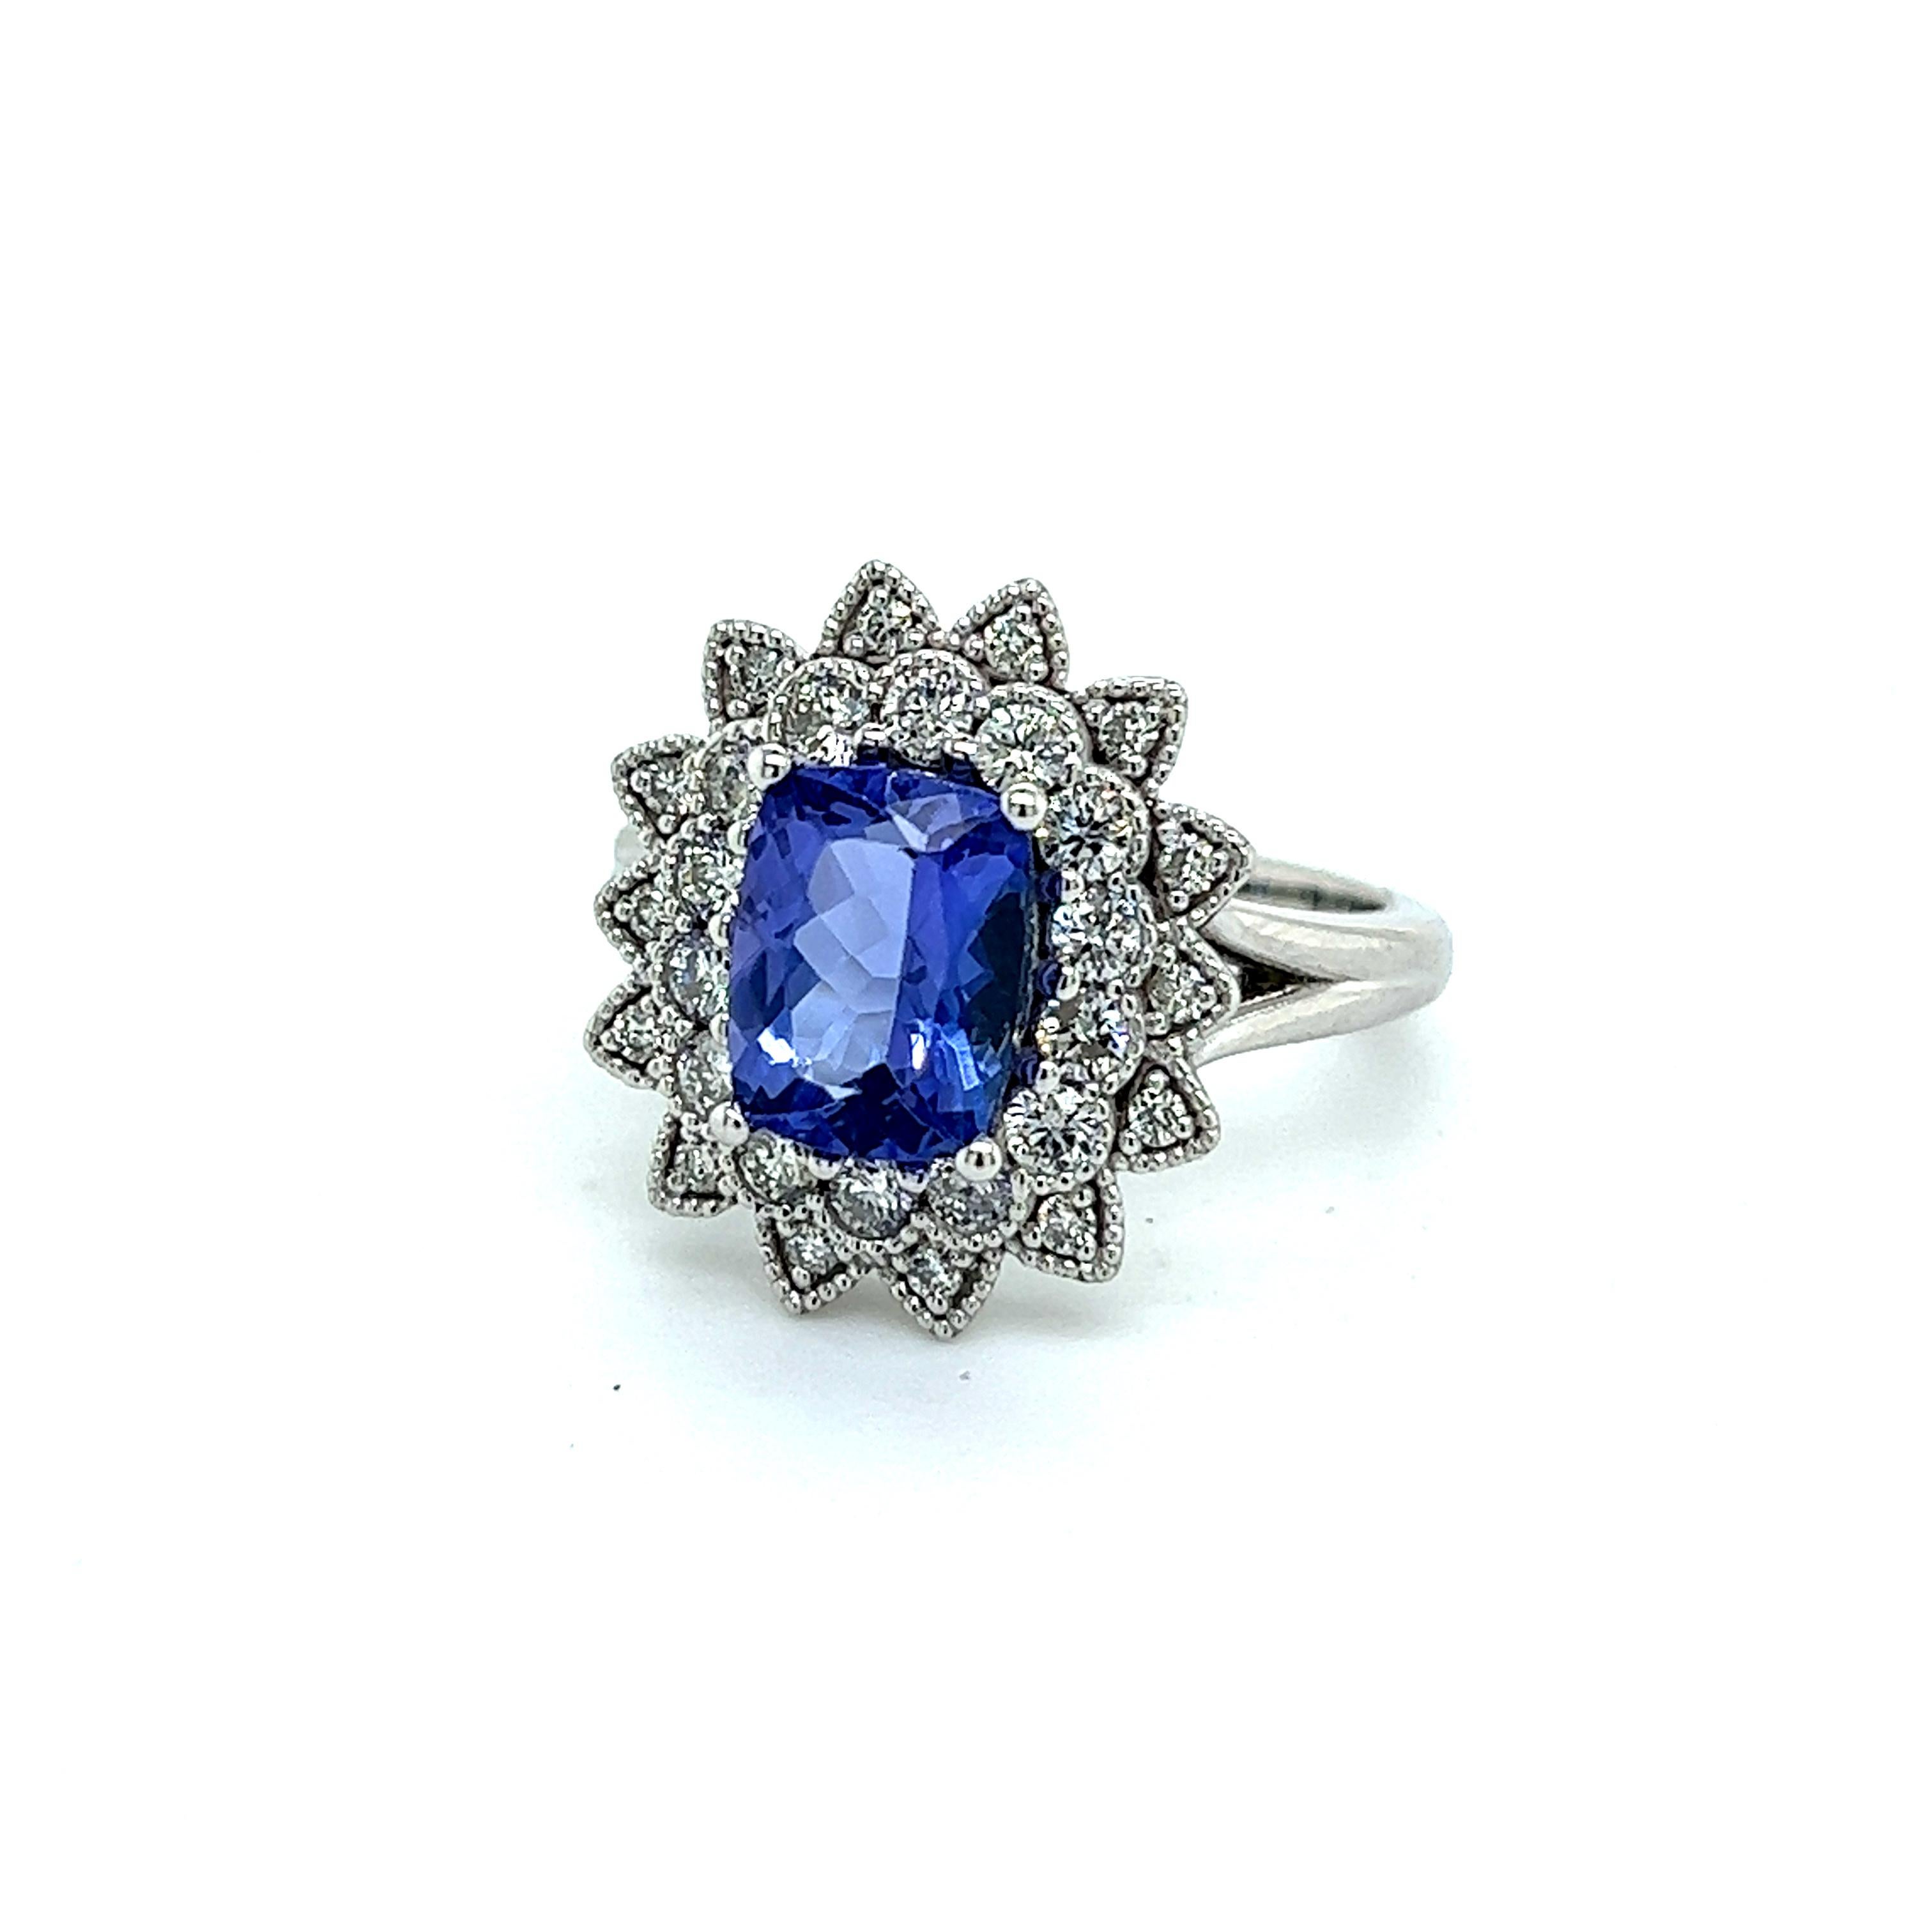 Natural Tanzanite Diamond Ring 6.5 14k W Gold 2.61 TCW Certified For Sale 5